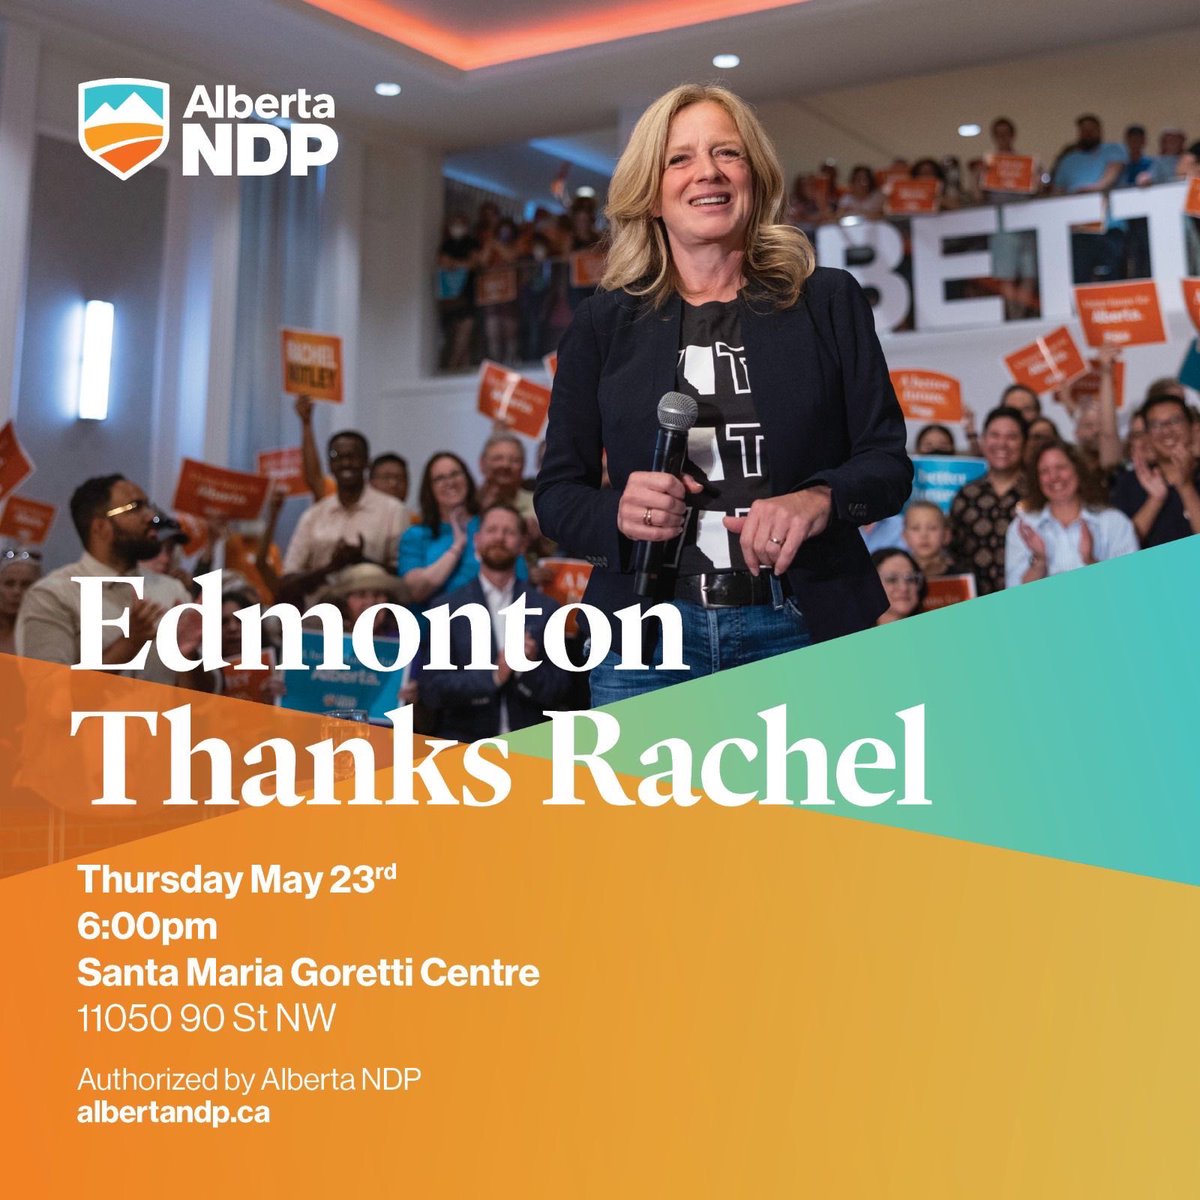 Let’s pack the house for this event to show appreciation for our leader, Rachel Notley!! #AbLeg #yeg